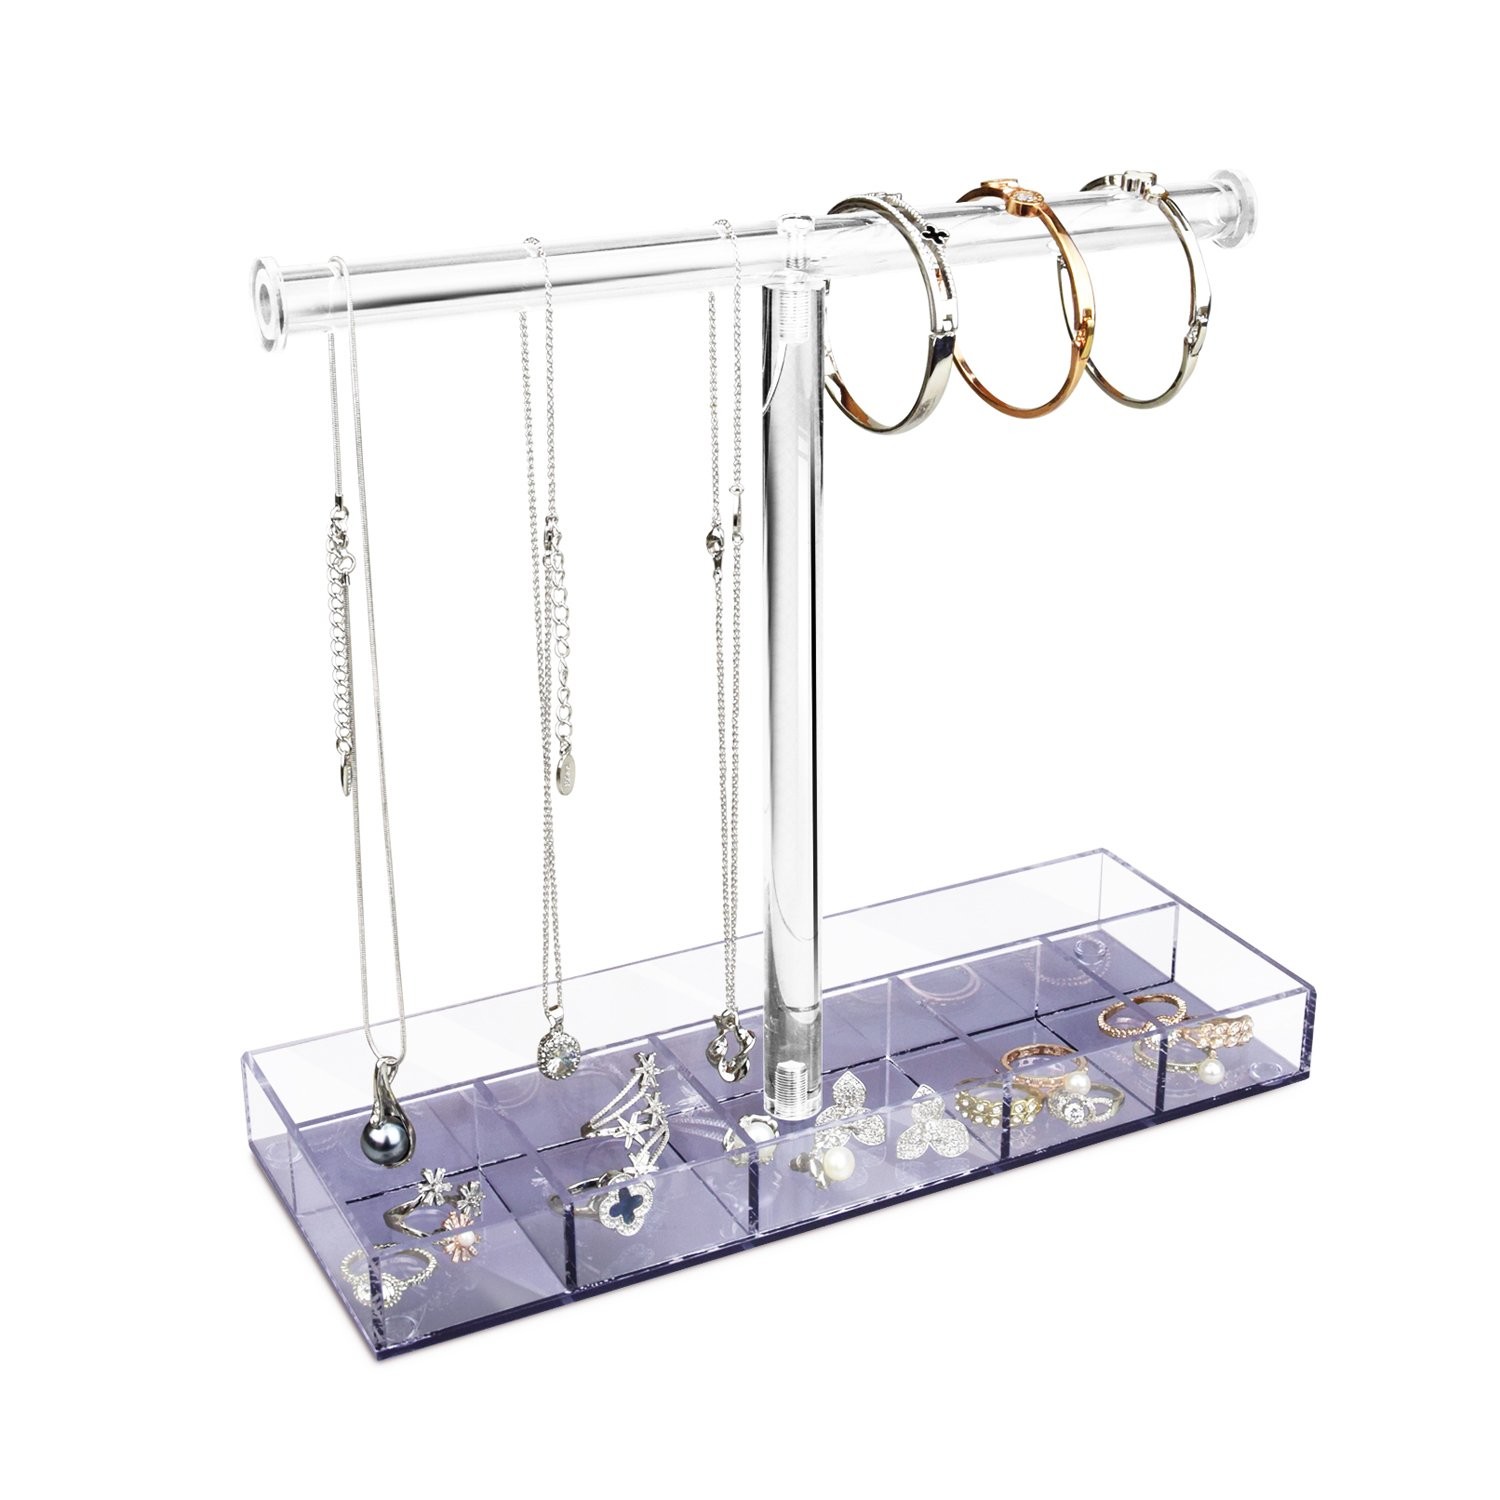  Transparent ROHS Acrylic Jewelry Display Bracelet Ring Holder Plate Manufactures